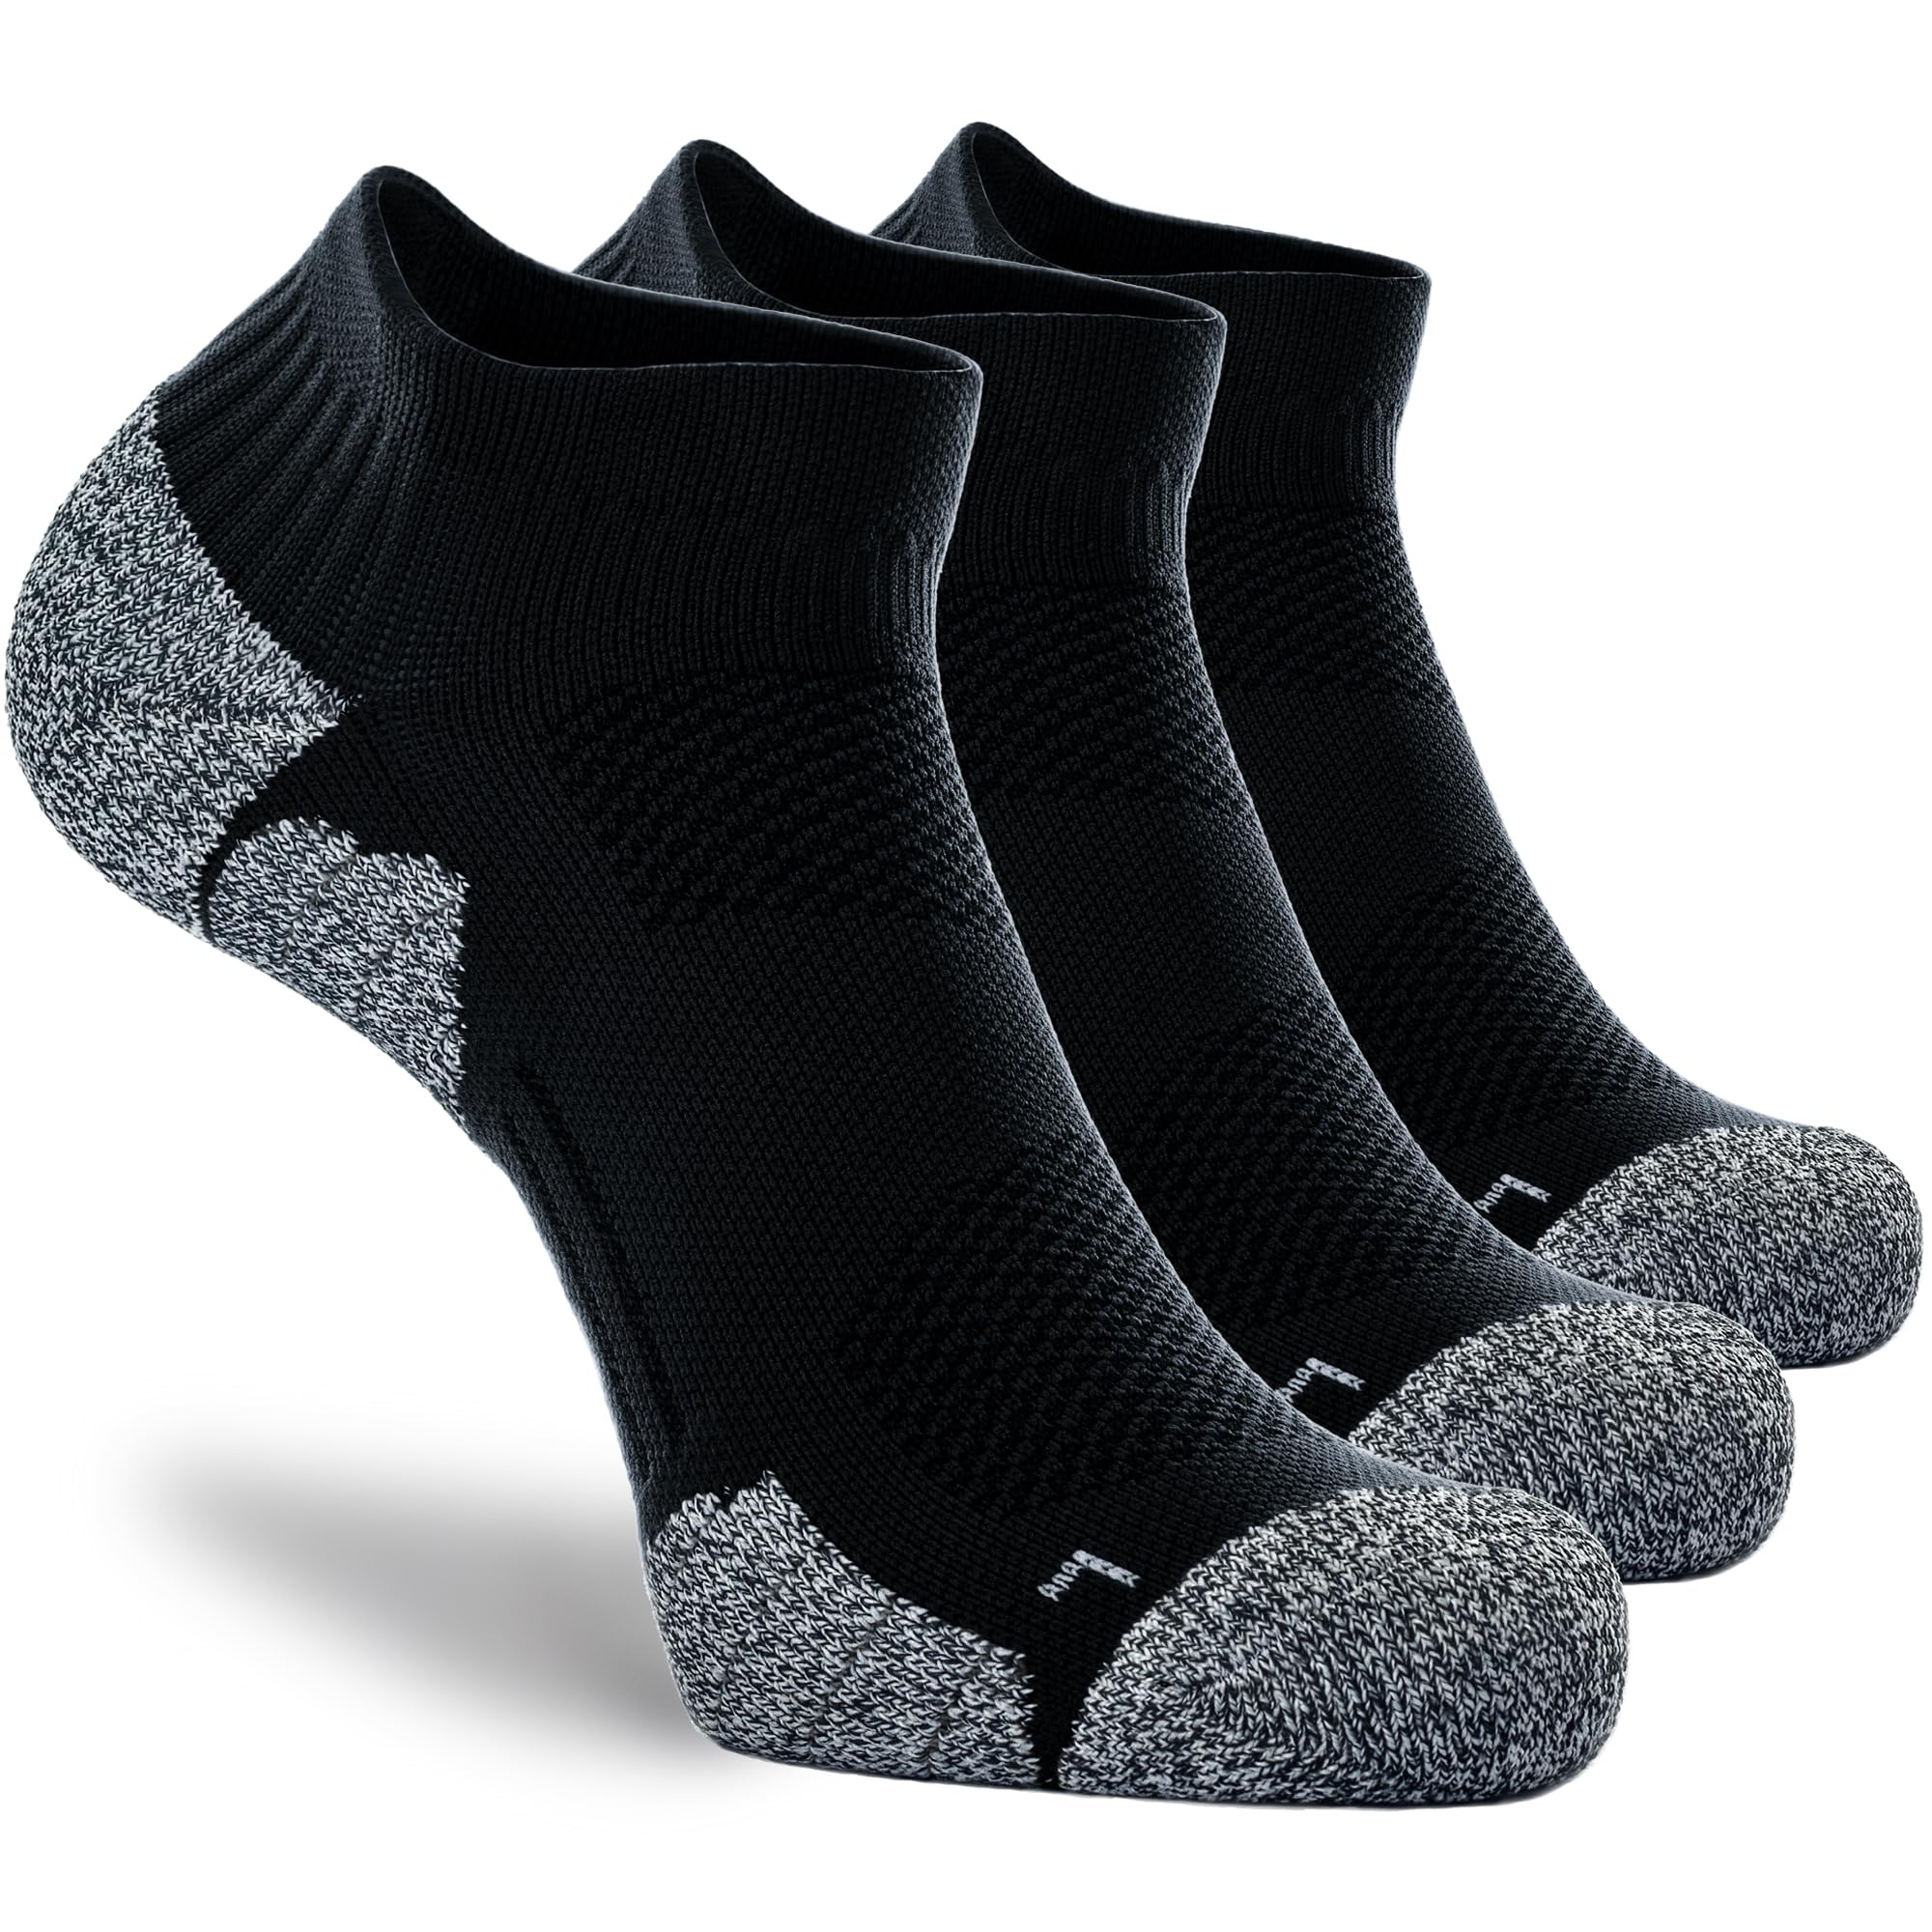 CWVLC Unisex Cushioned Compression Athletic Ankle Socks Multipack, 3-pairs Black, M (7.5-10 W US/ 6-8.5 M US)